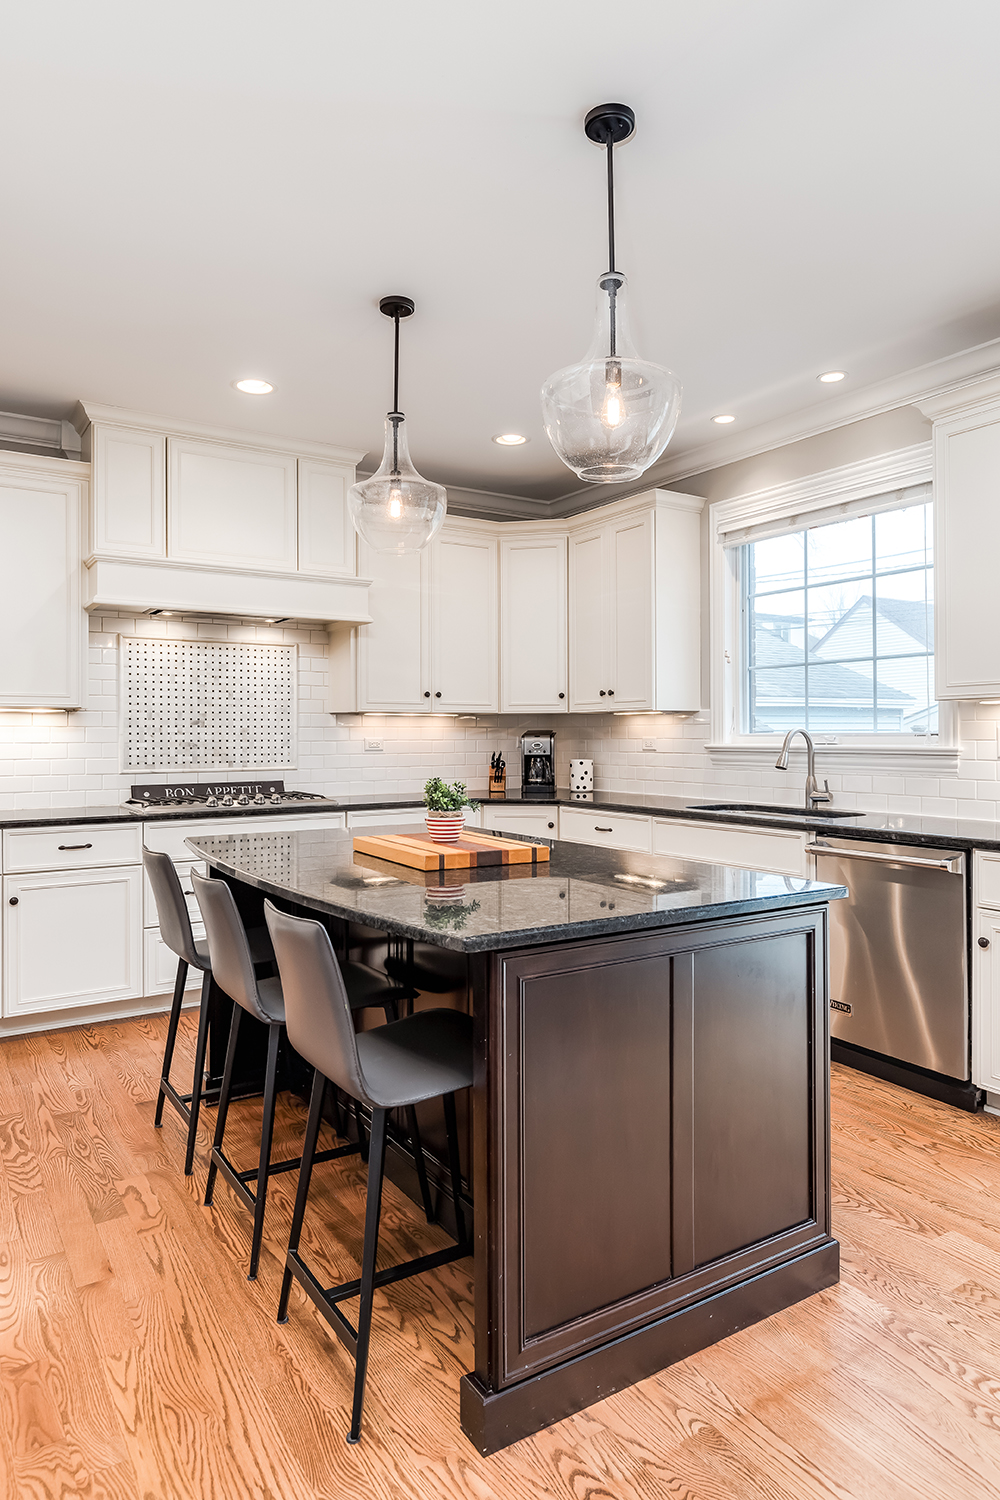 when remodeling a kitchen, what comes first, floors or cabinets